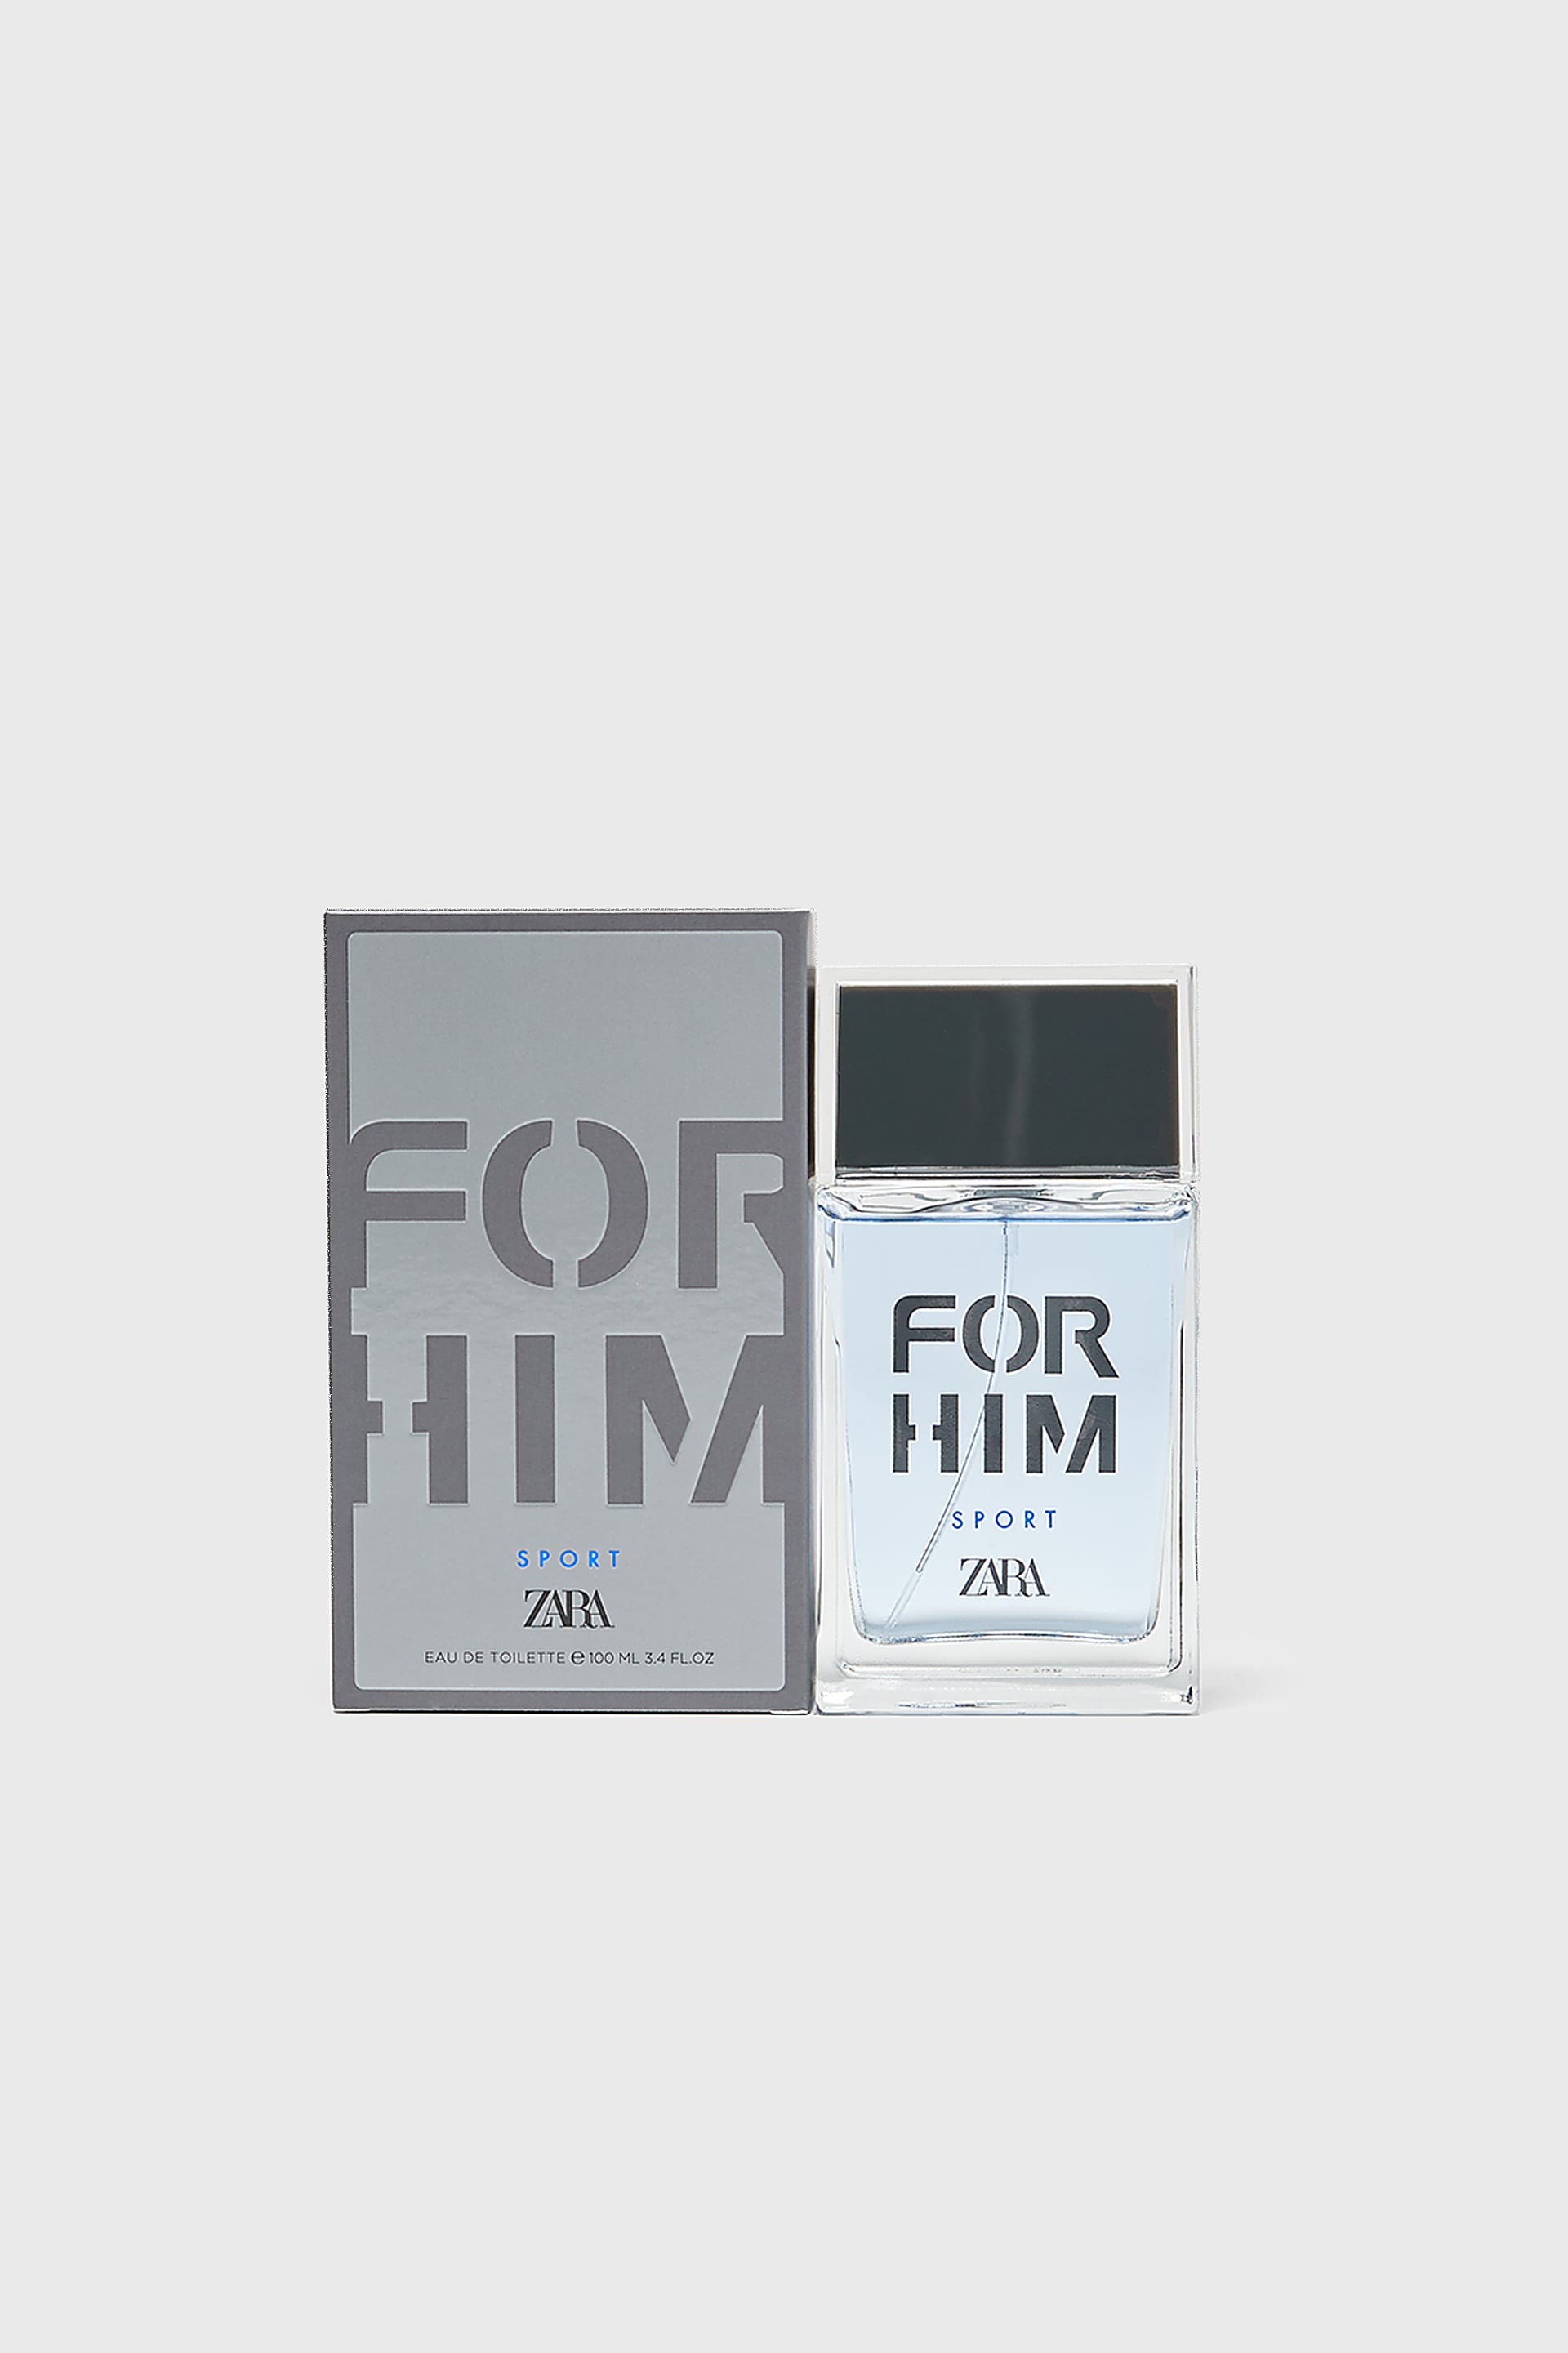 zara for him silver edition review